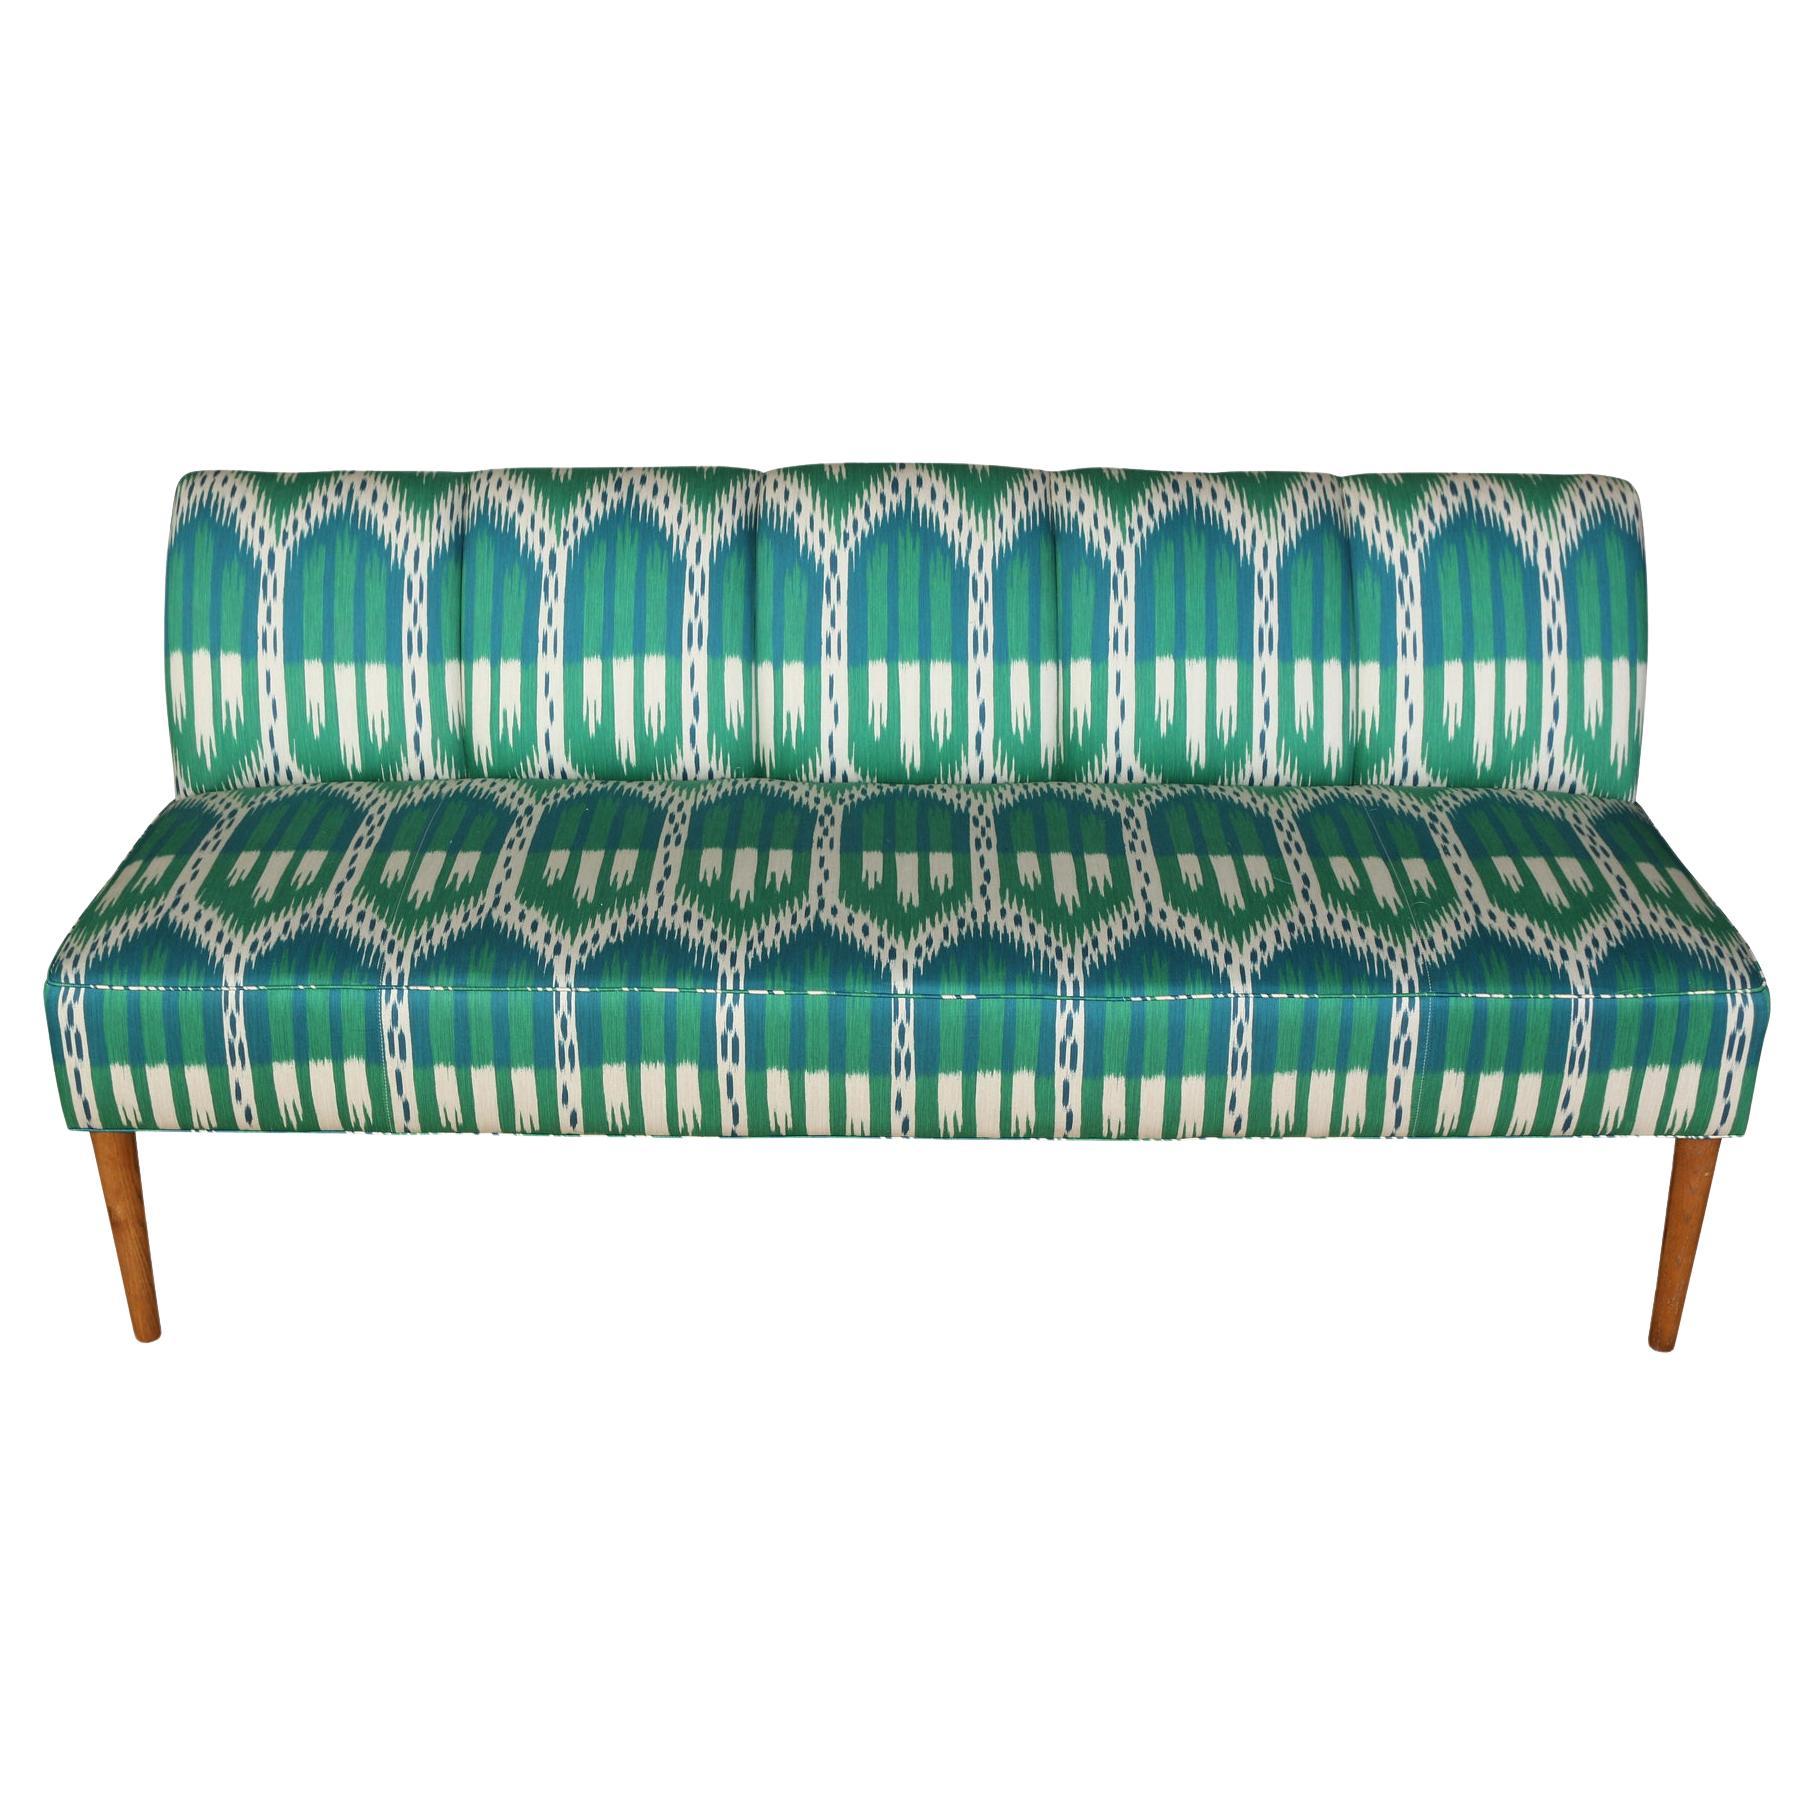 Teal and Turquoise Ikat Banquette